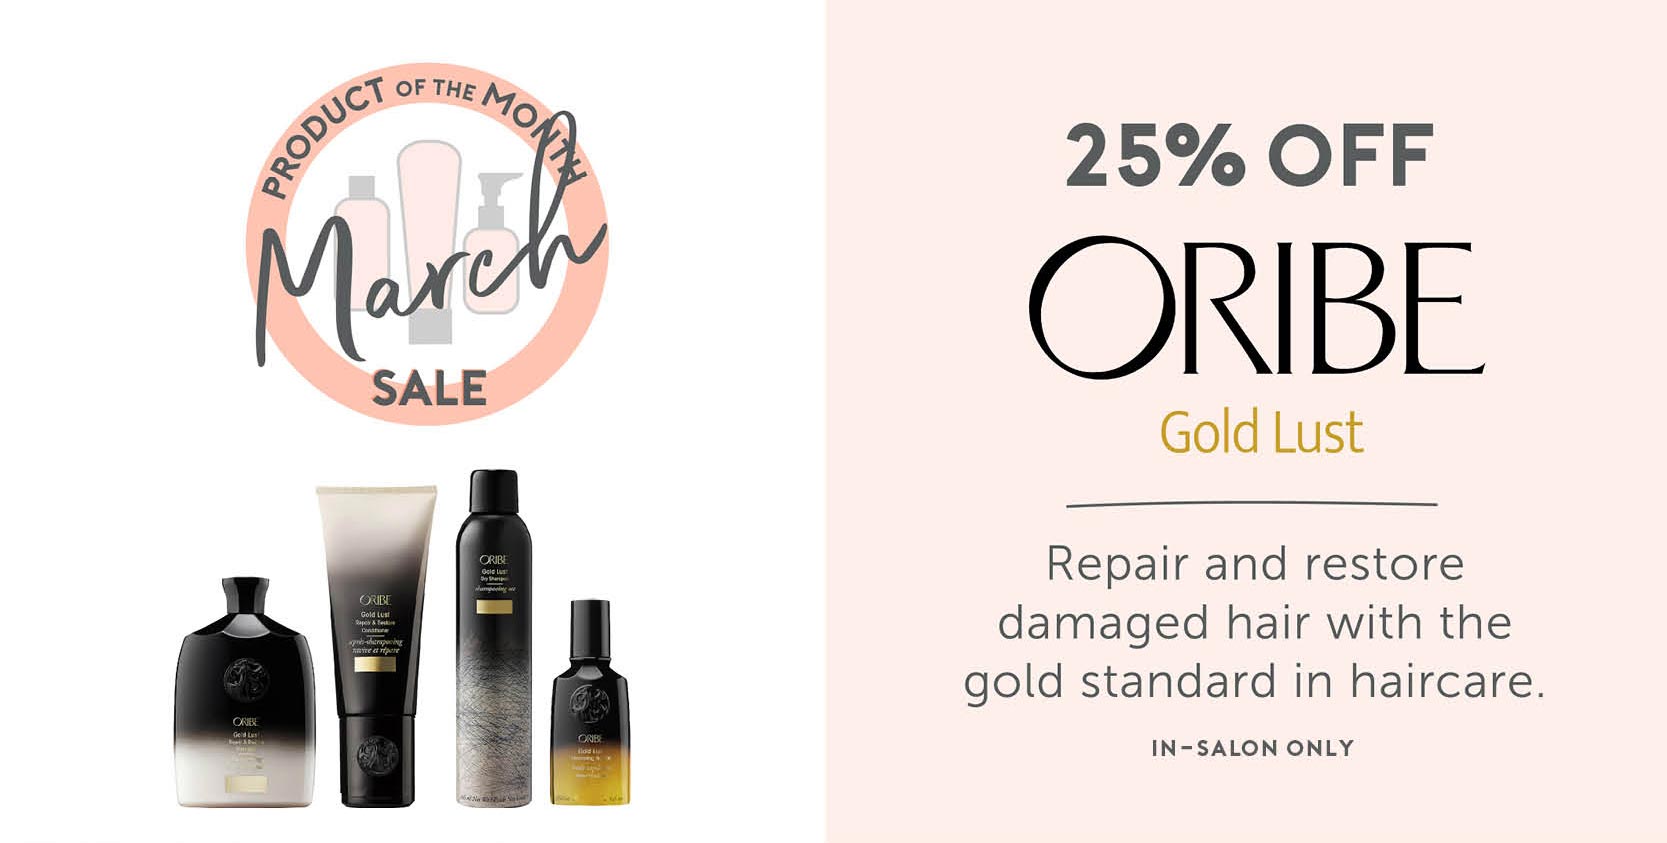 March - Product of the Month Sale - 25% off ORIBE Gold Lust. Repair and restore damaged hair with the gold standard in haircare. In-Salon Only. 